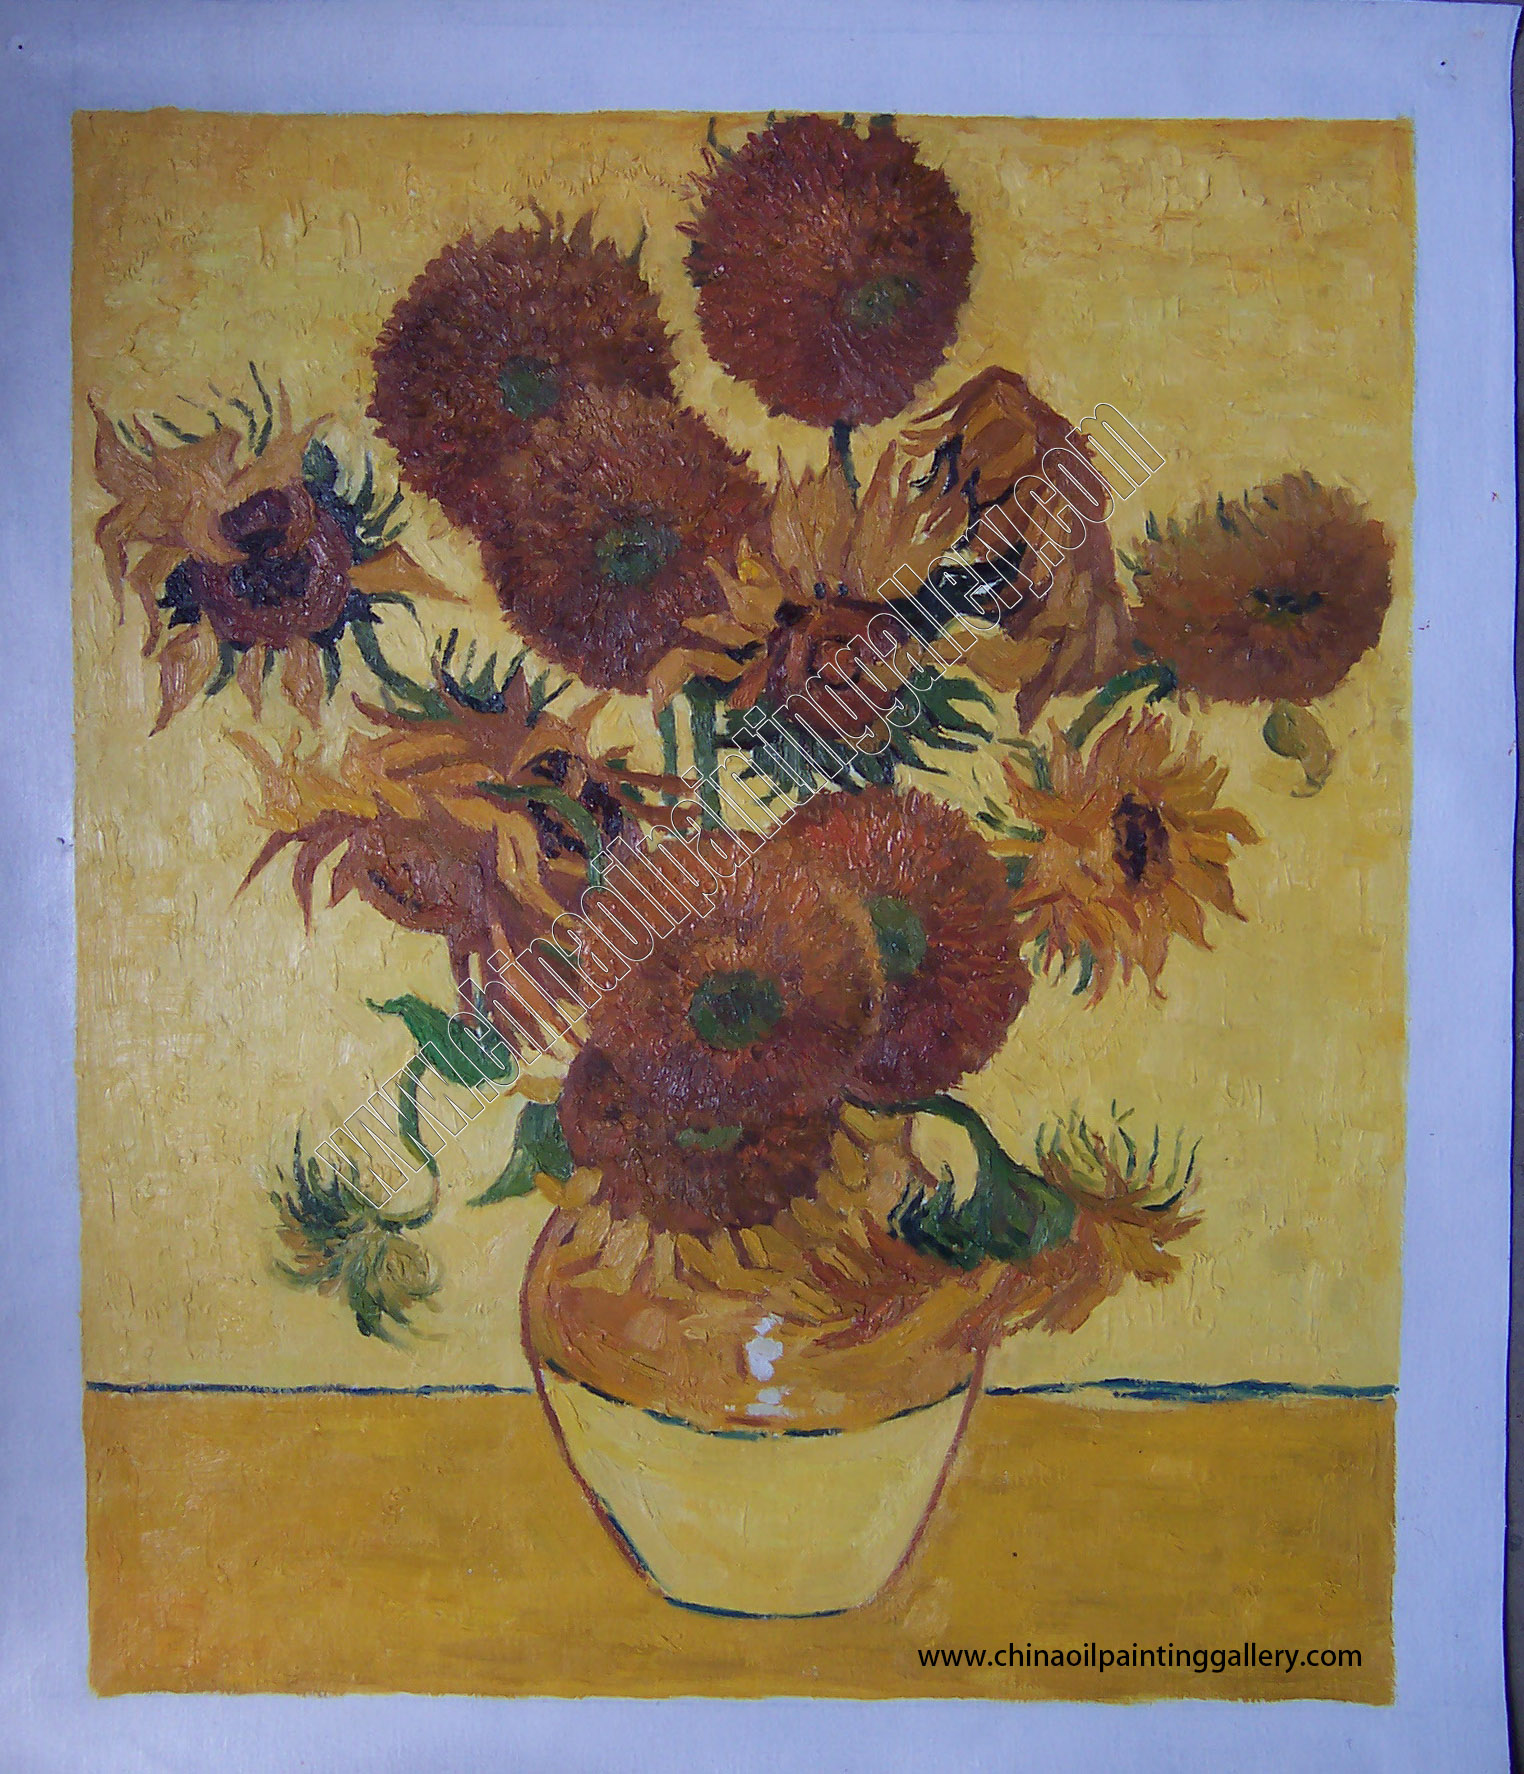 Vincent van Gogh Sunflowers - Oil painting reproductions 14